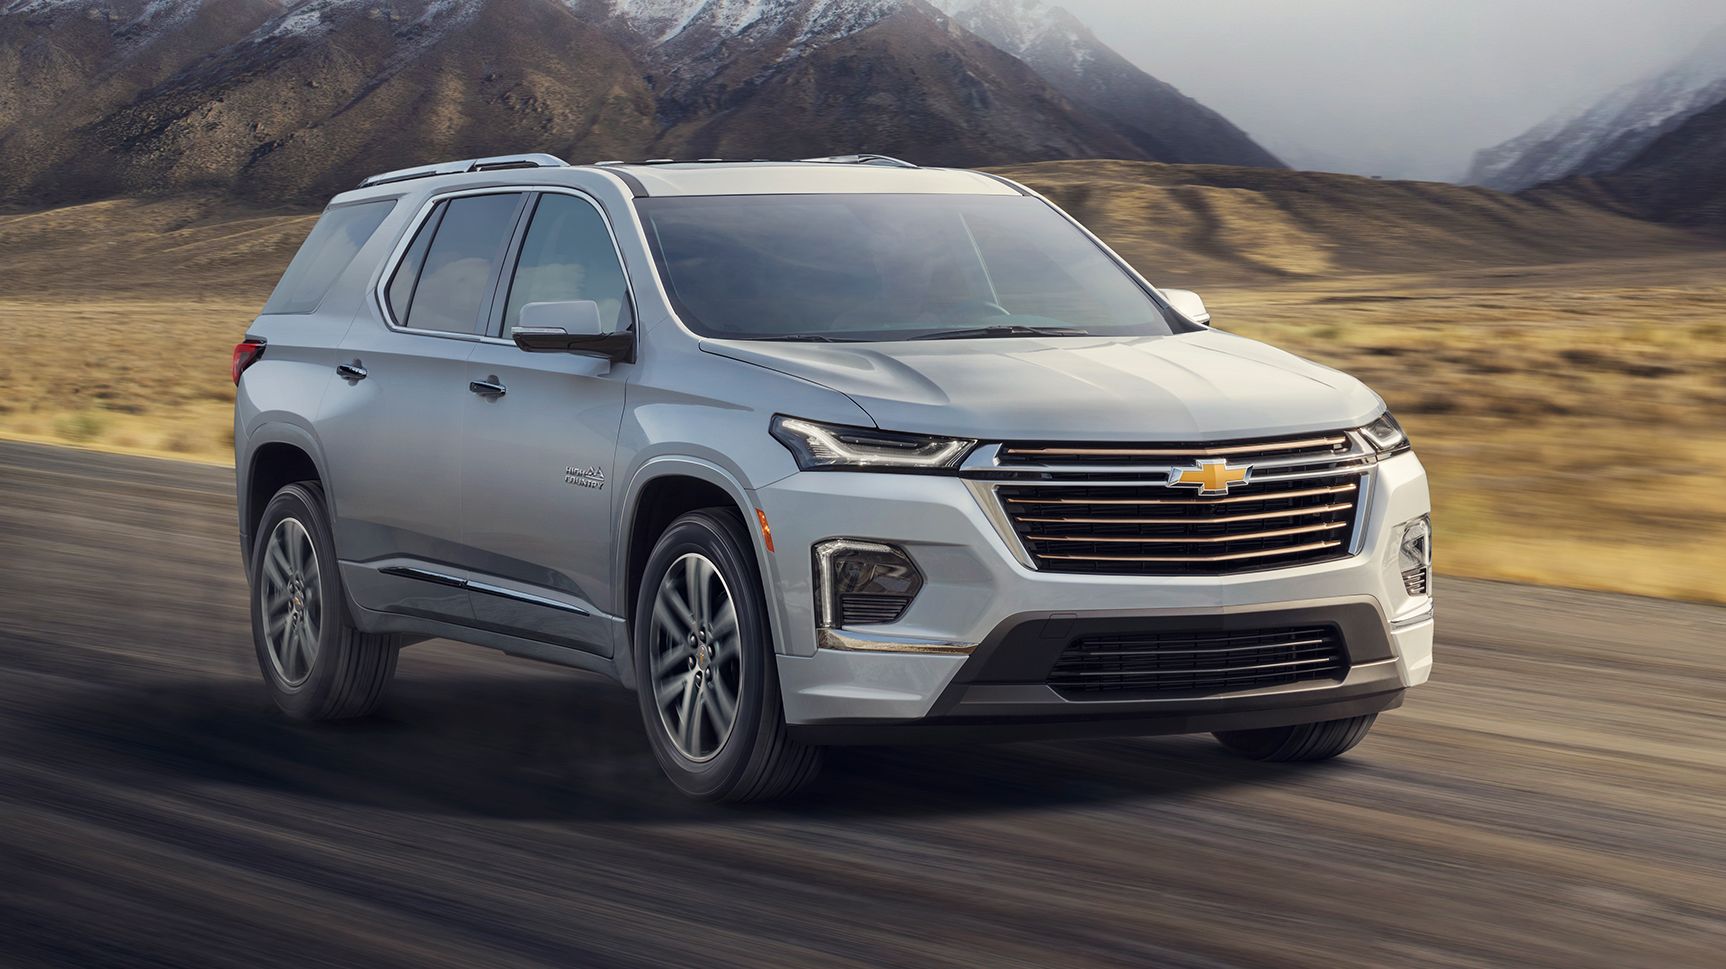 The 2022 Chev Traverse on the road